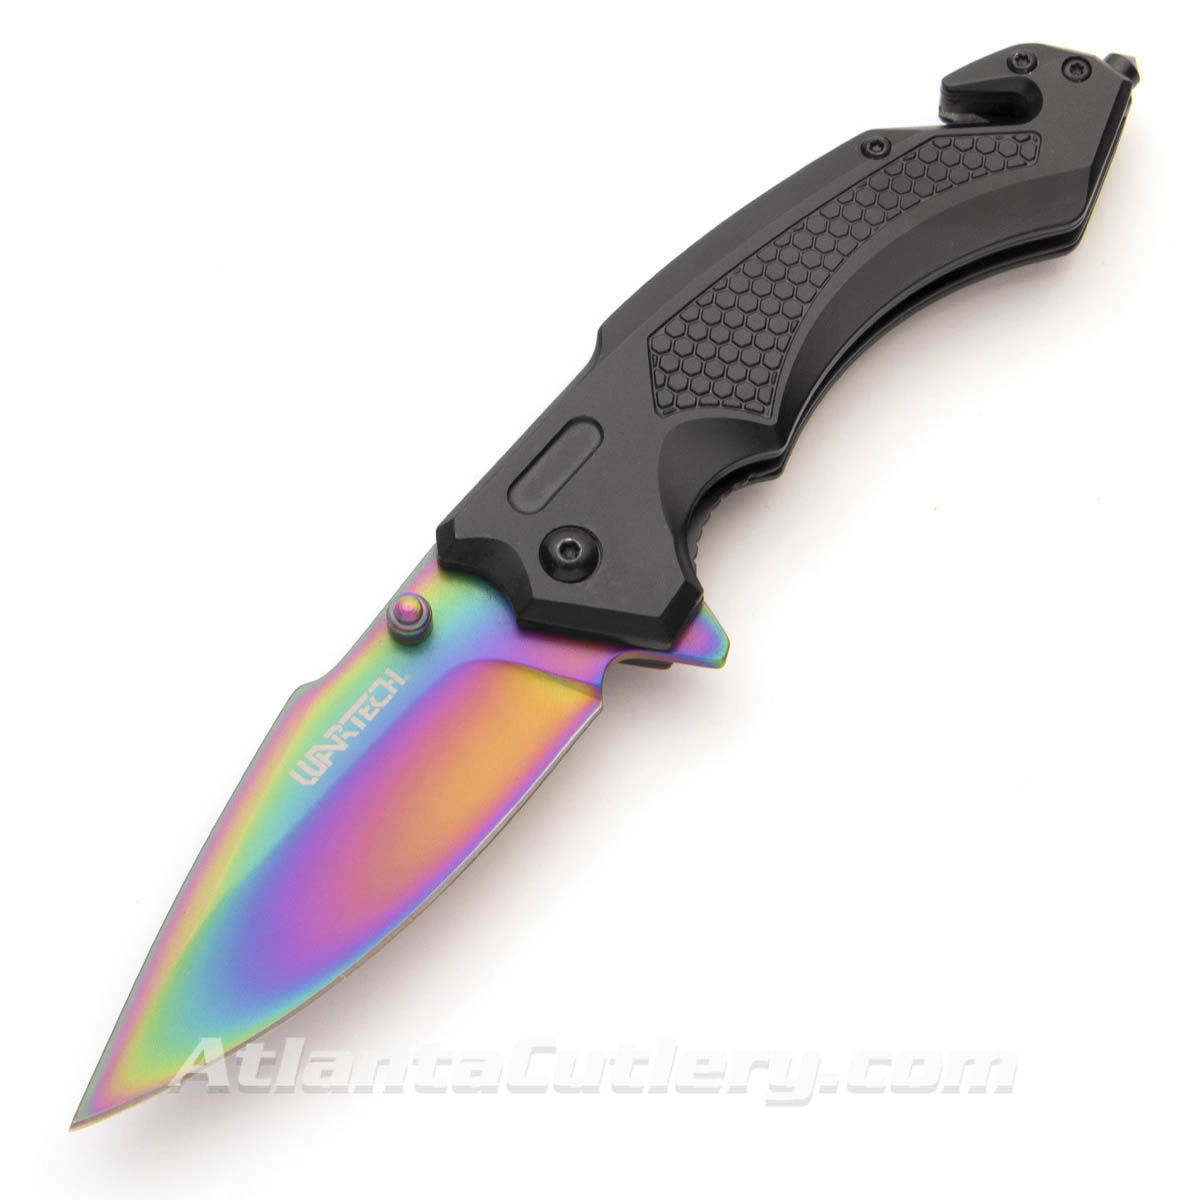 Wartech assisted opening, liner lock pocket knife with rainbow 3CR13 stainless steel blade, glass breaker and seatbelt cutter